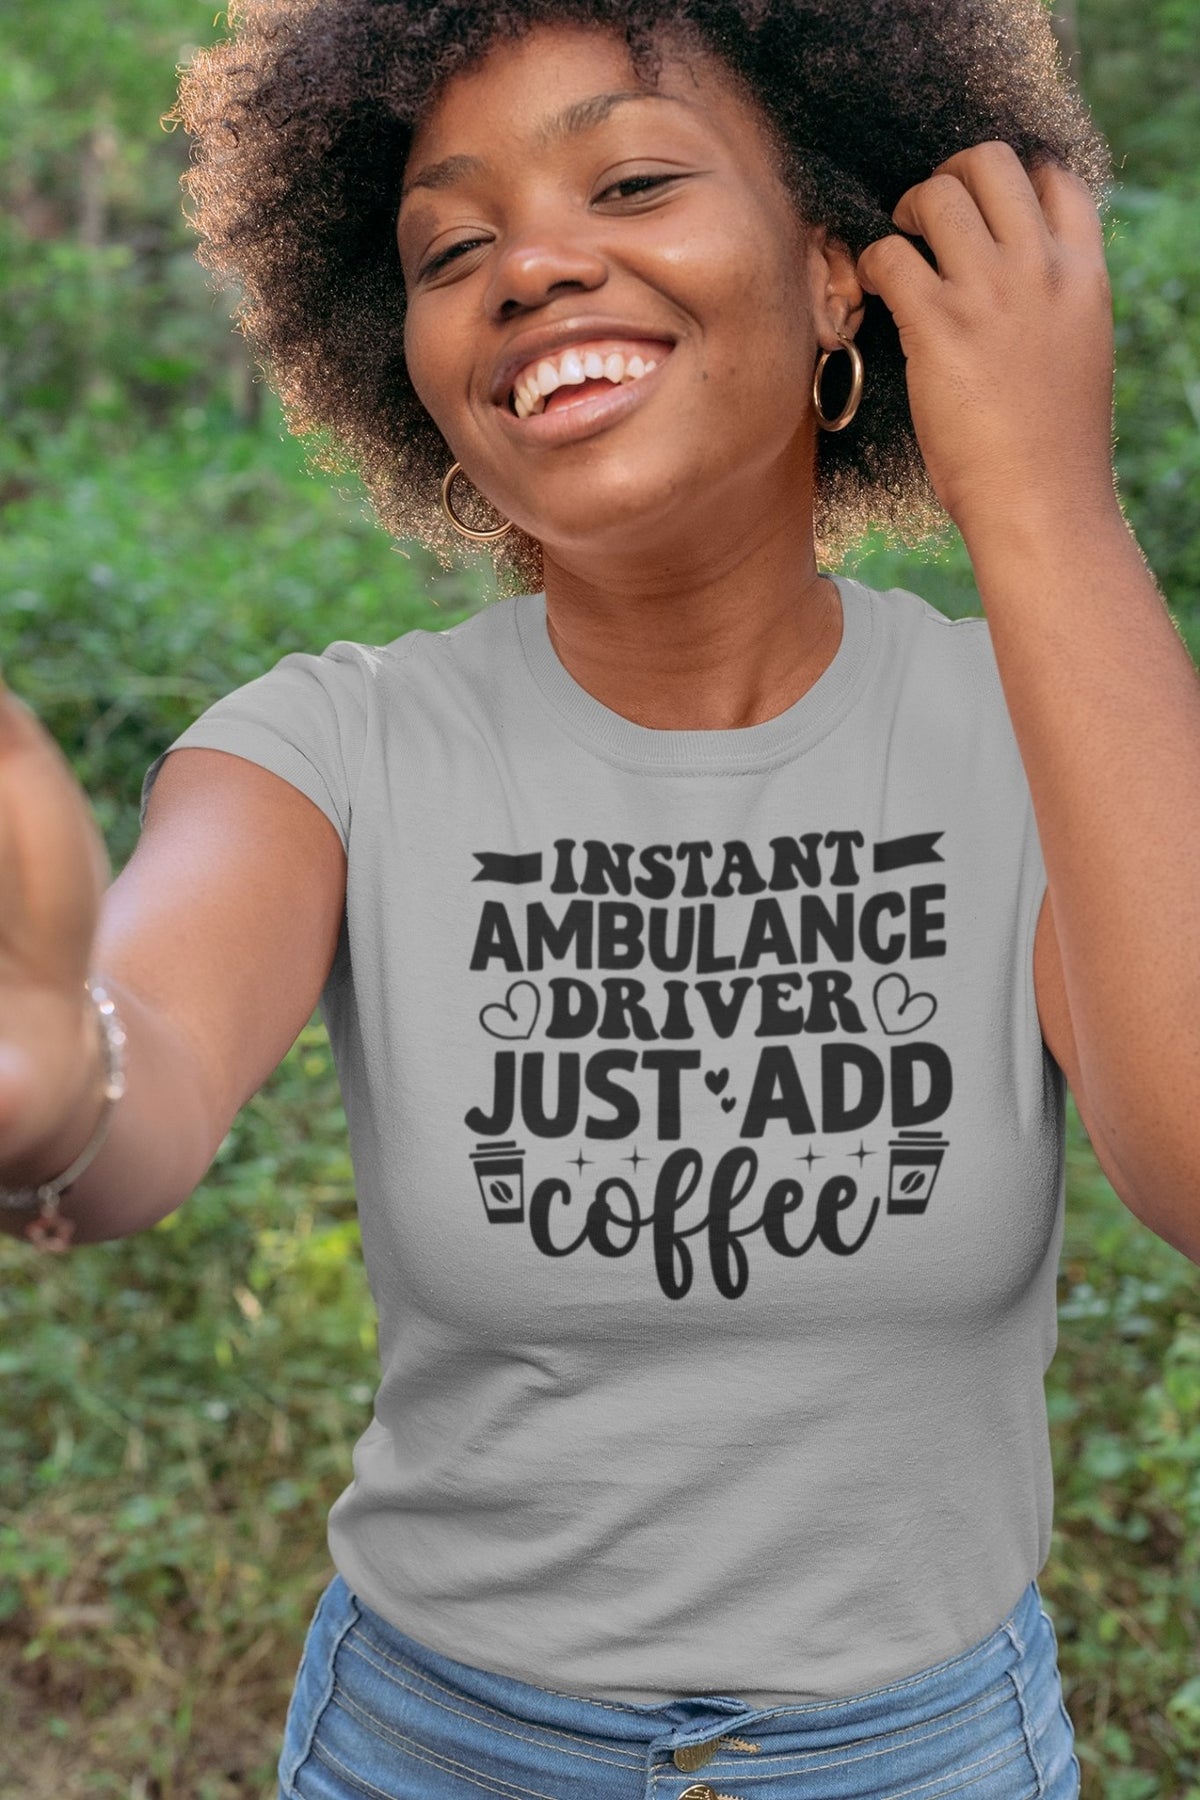 Instant Ambulance Driver, Just Add Coffee Women's Short Sleeve Tee - Salty Medic Clothing Co.